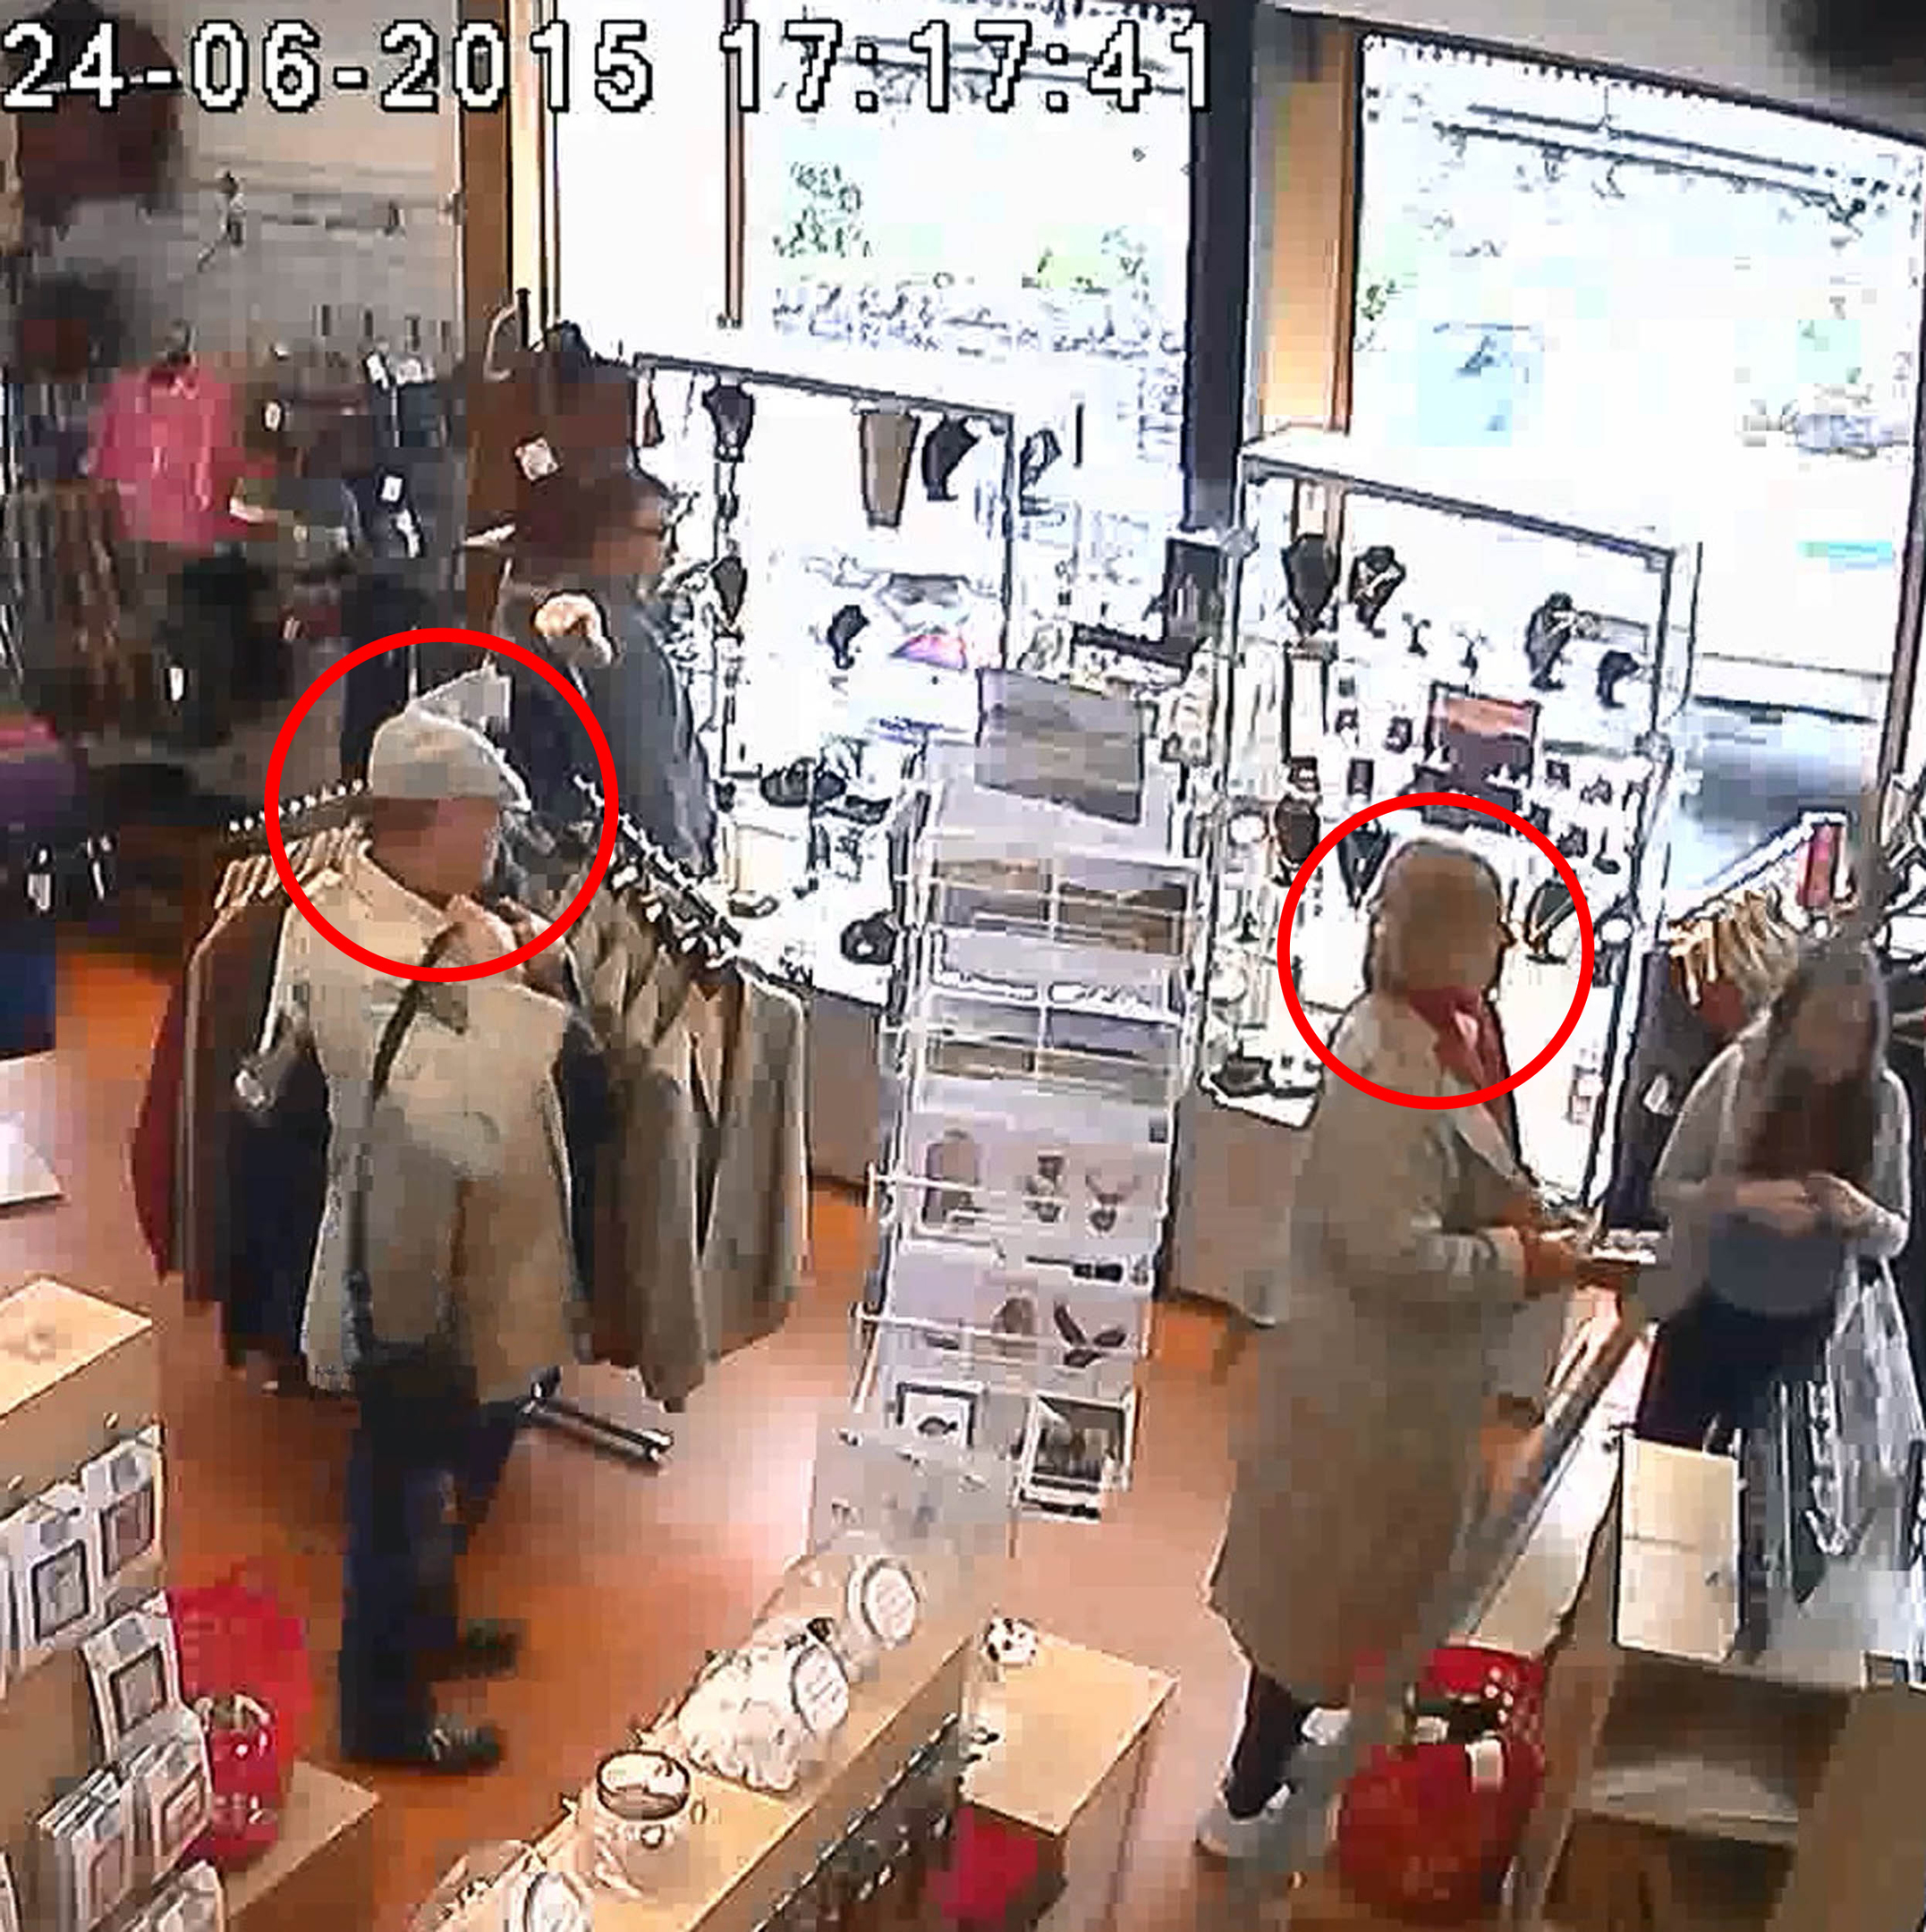 The French couple were filmed on the shop's CCTV